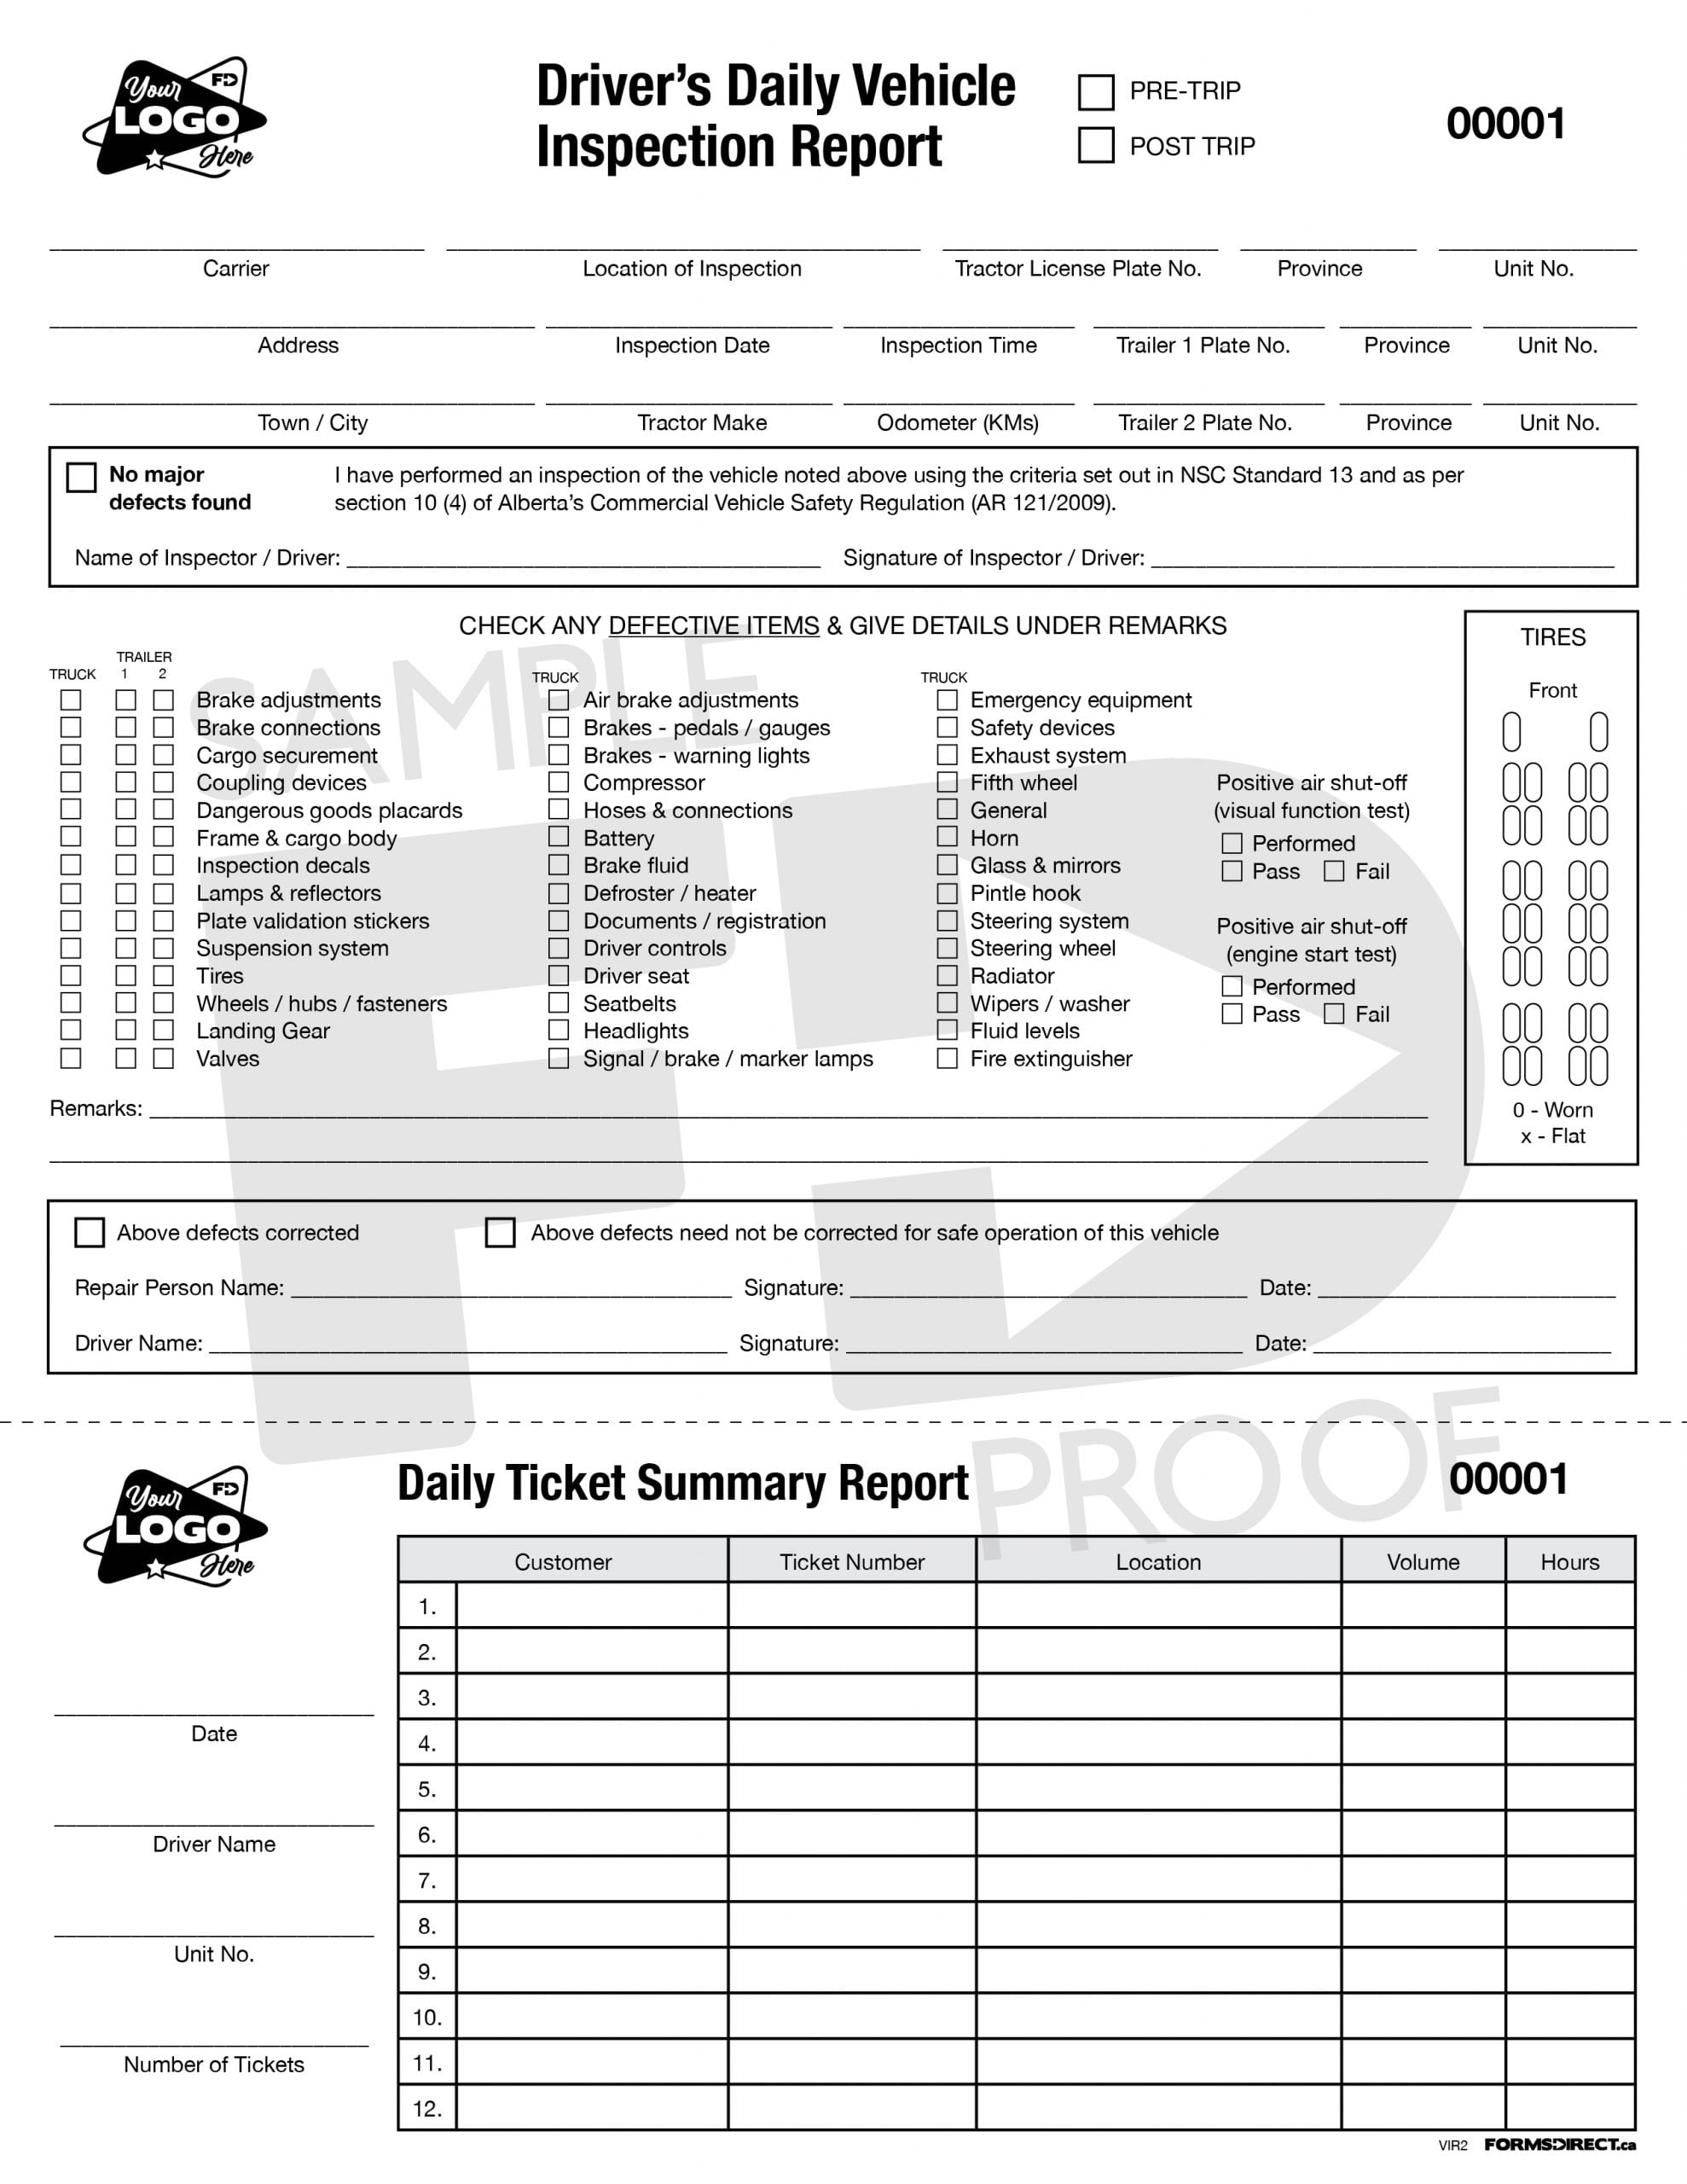 Free Printable Driver Vehicle Inspection Report Form - prntbl ...